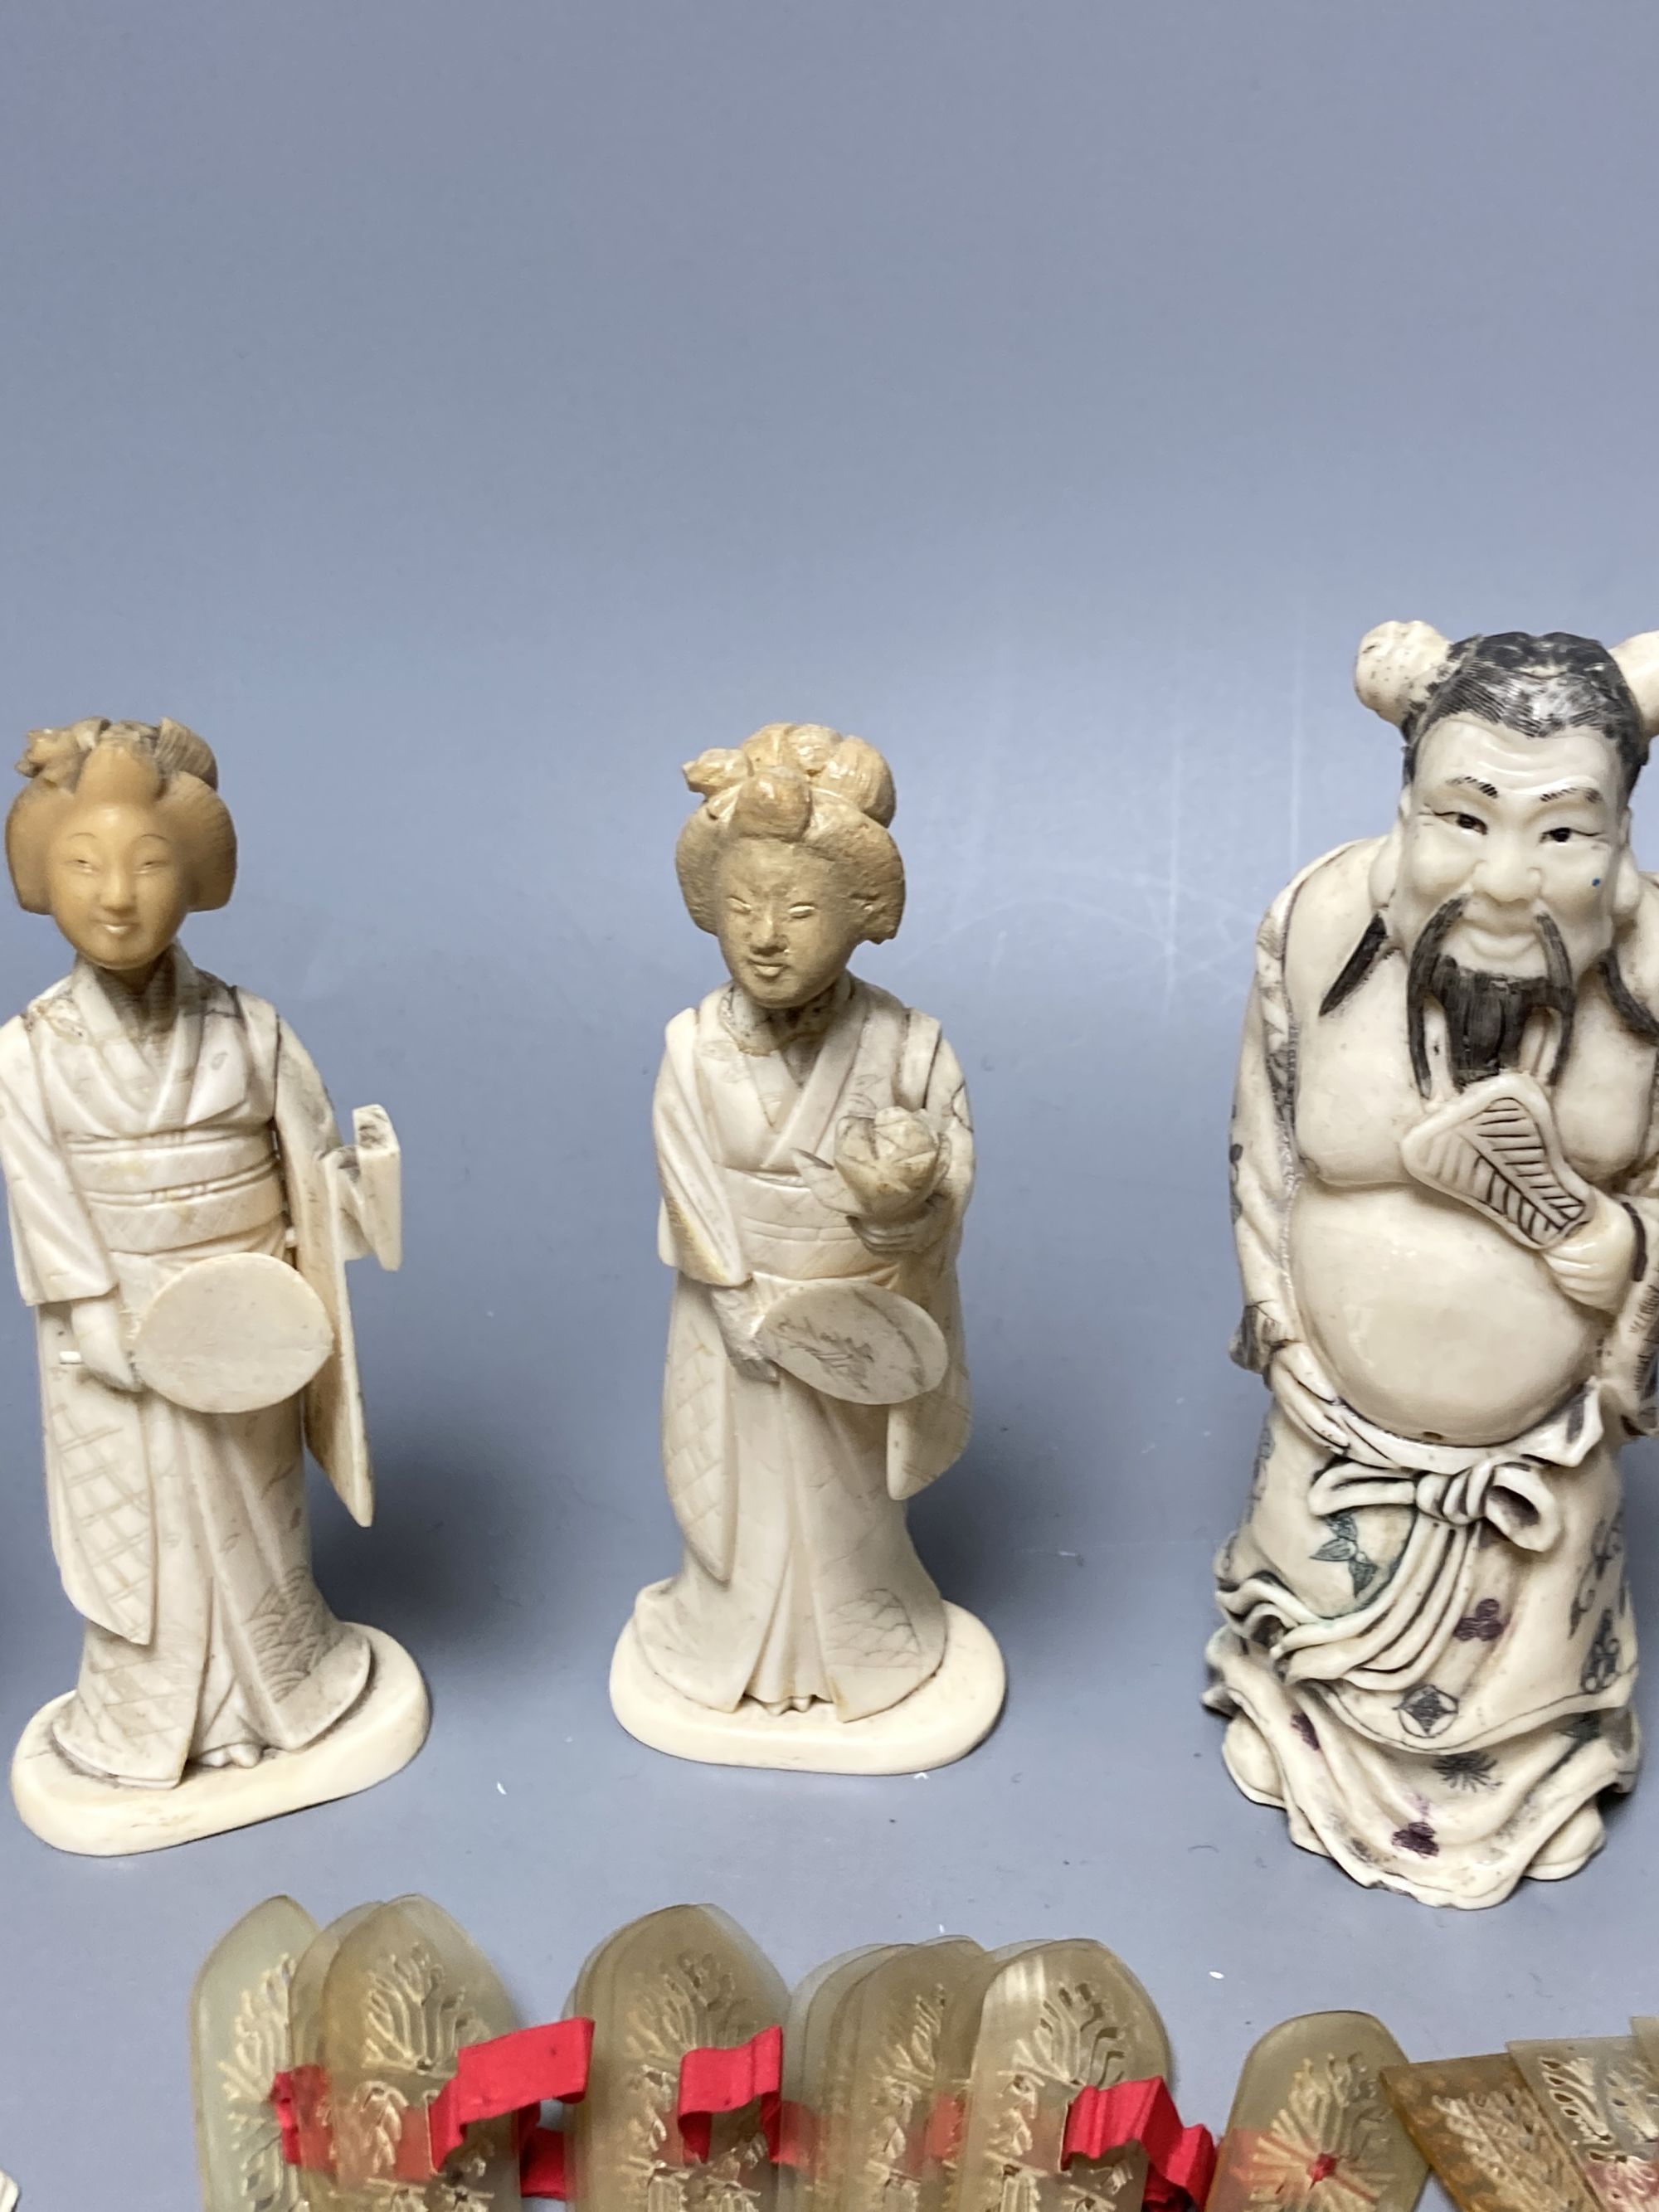 A quantity of bone and ivory carvings including fans and figures